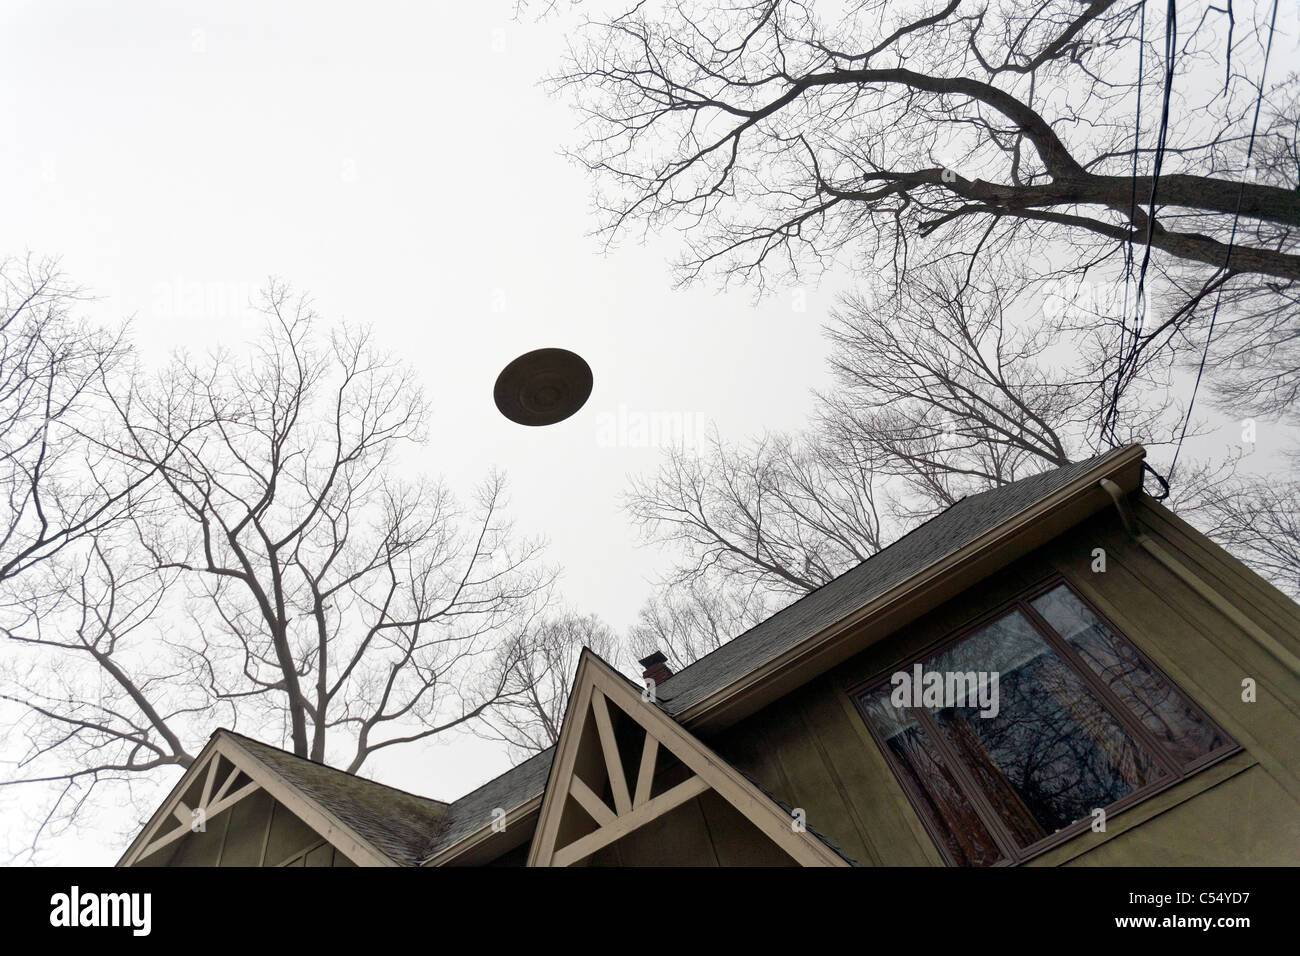 UFO flying over a house. Stock Photo